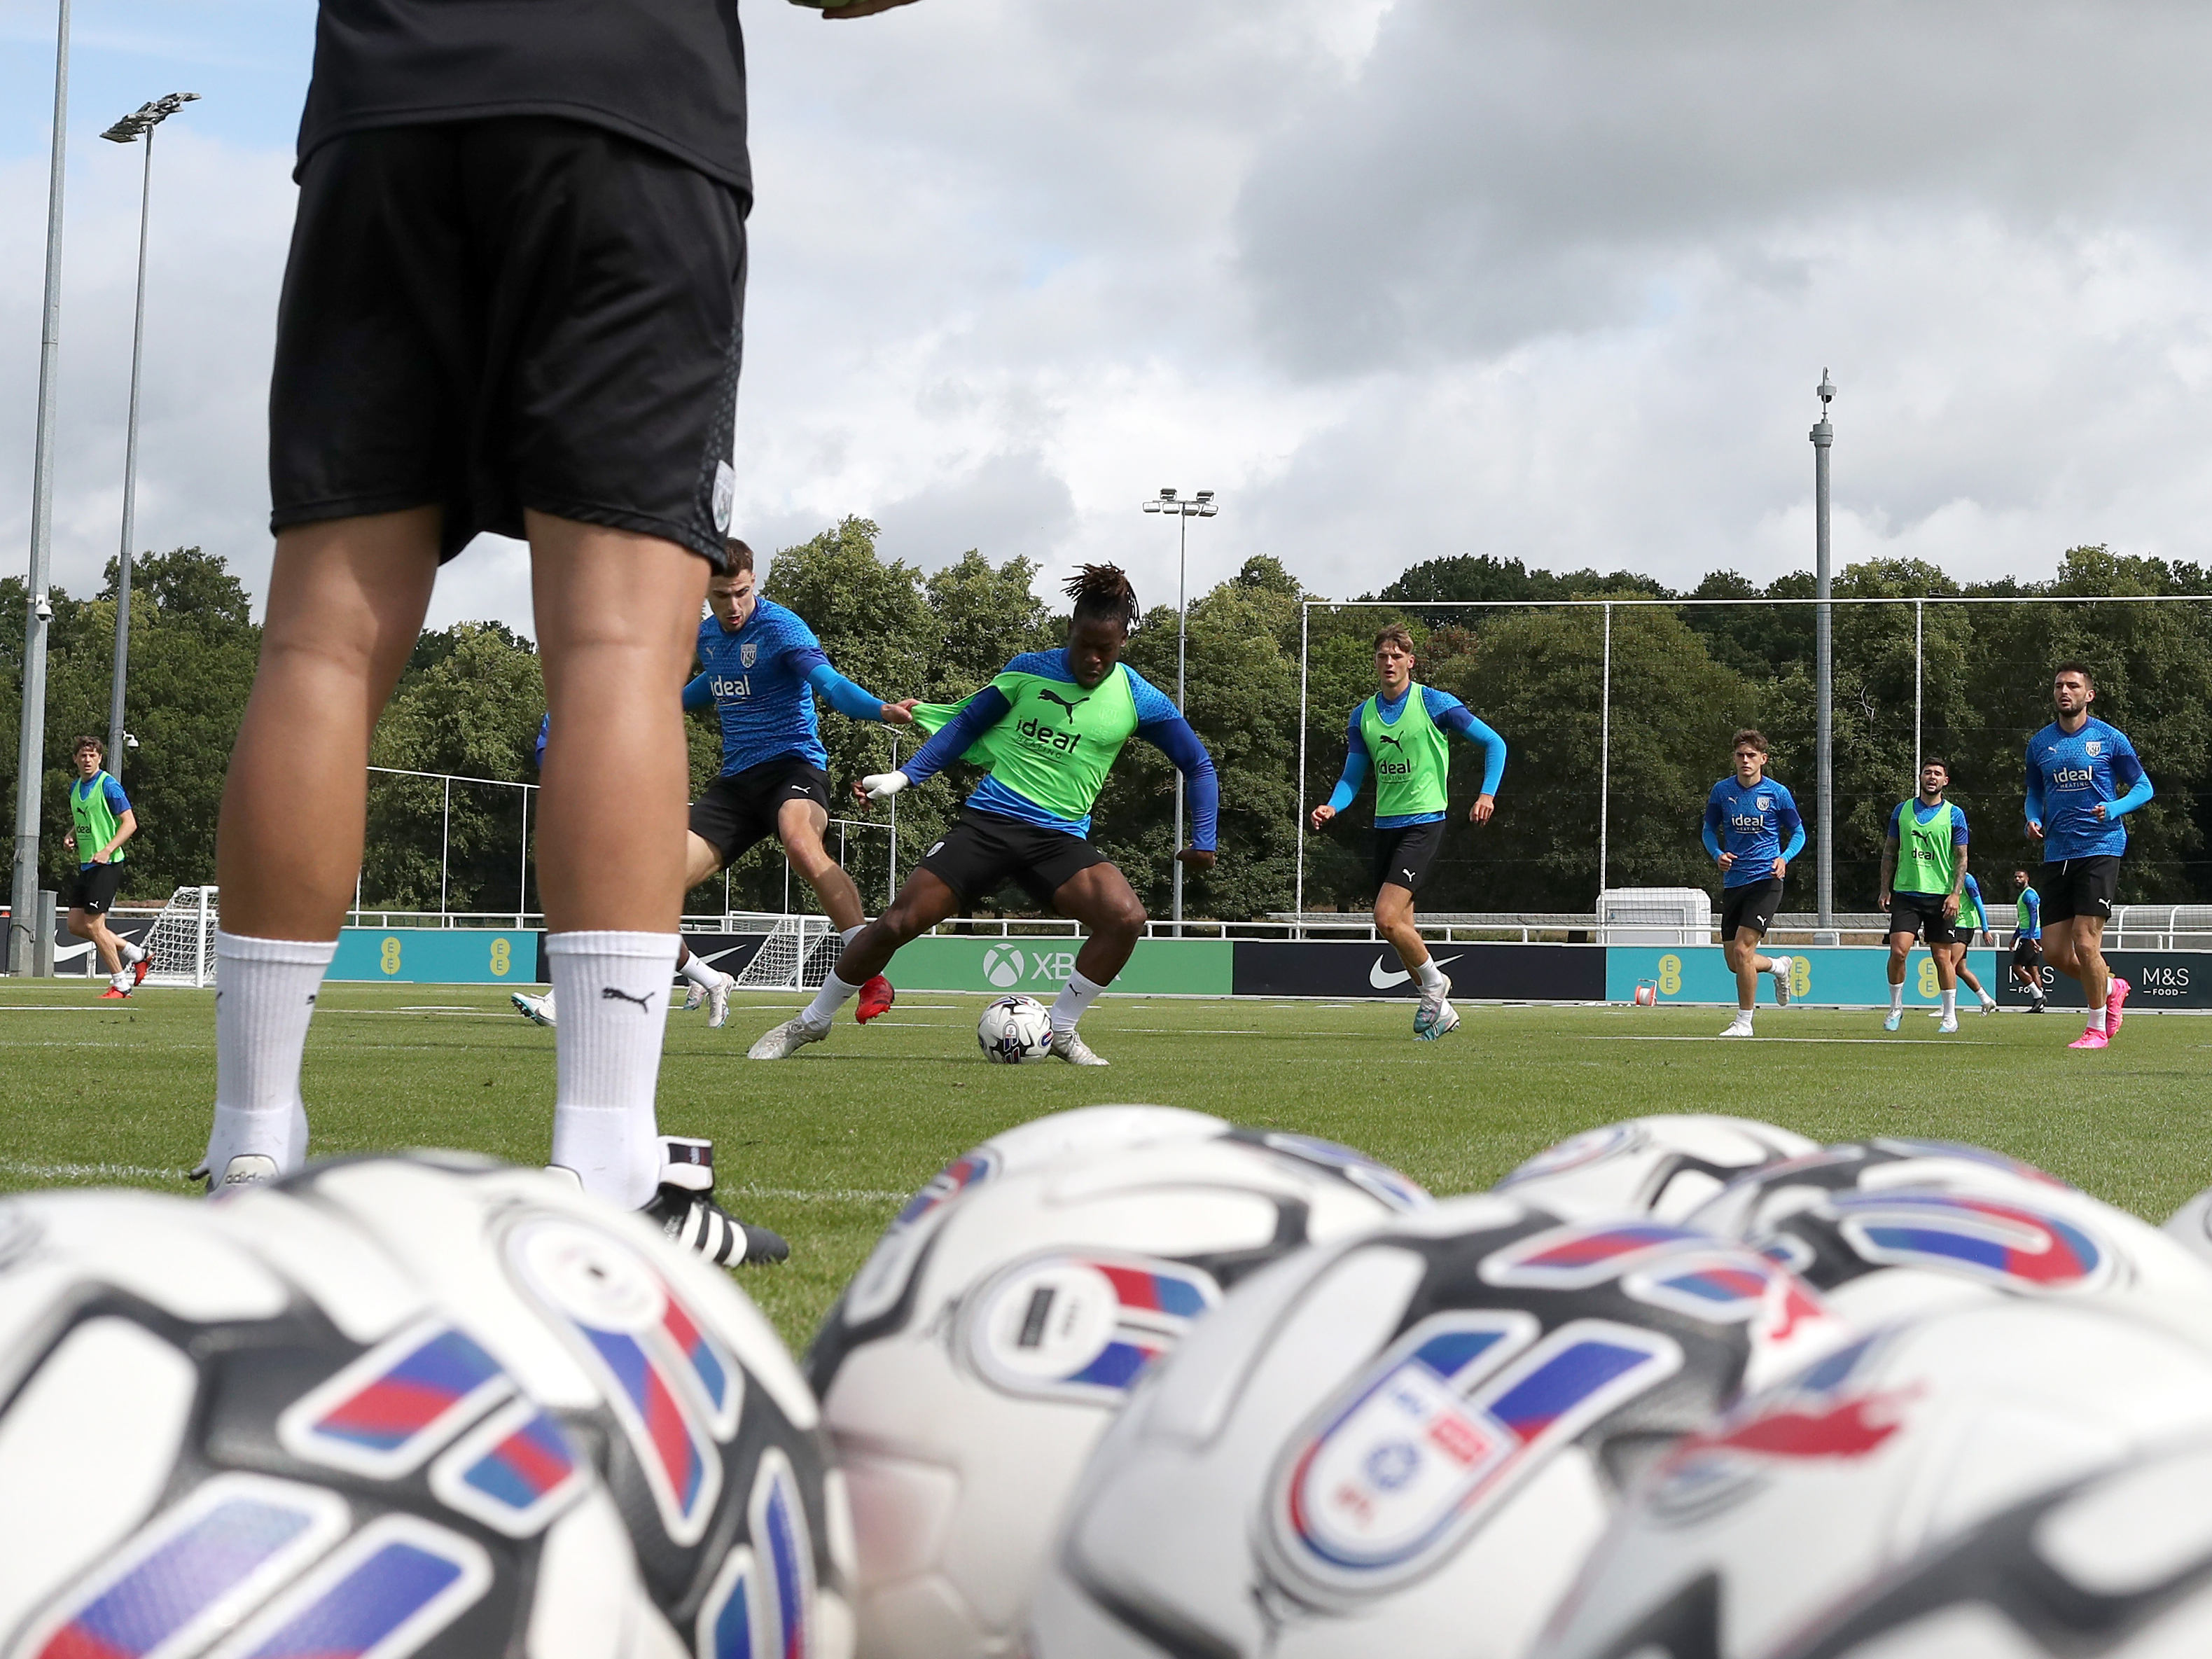 Albion players in training at St. George's Park with several footballs in shot